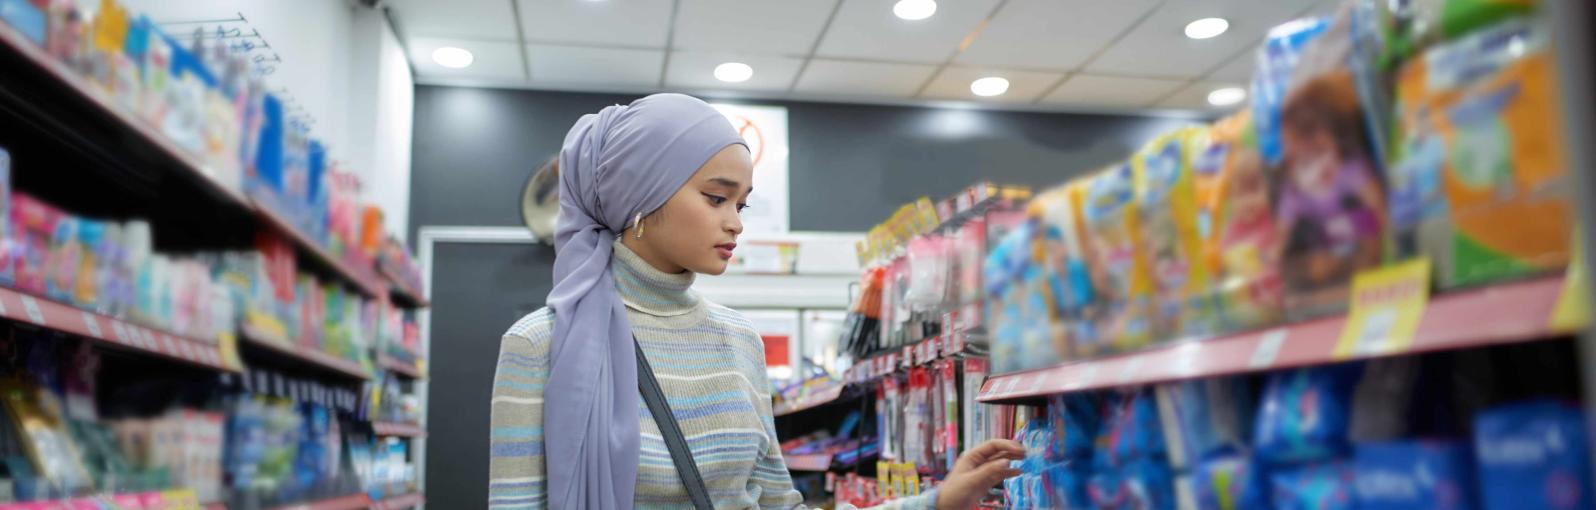 Student shopping in convenience store aisle